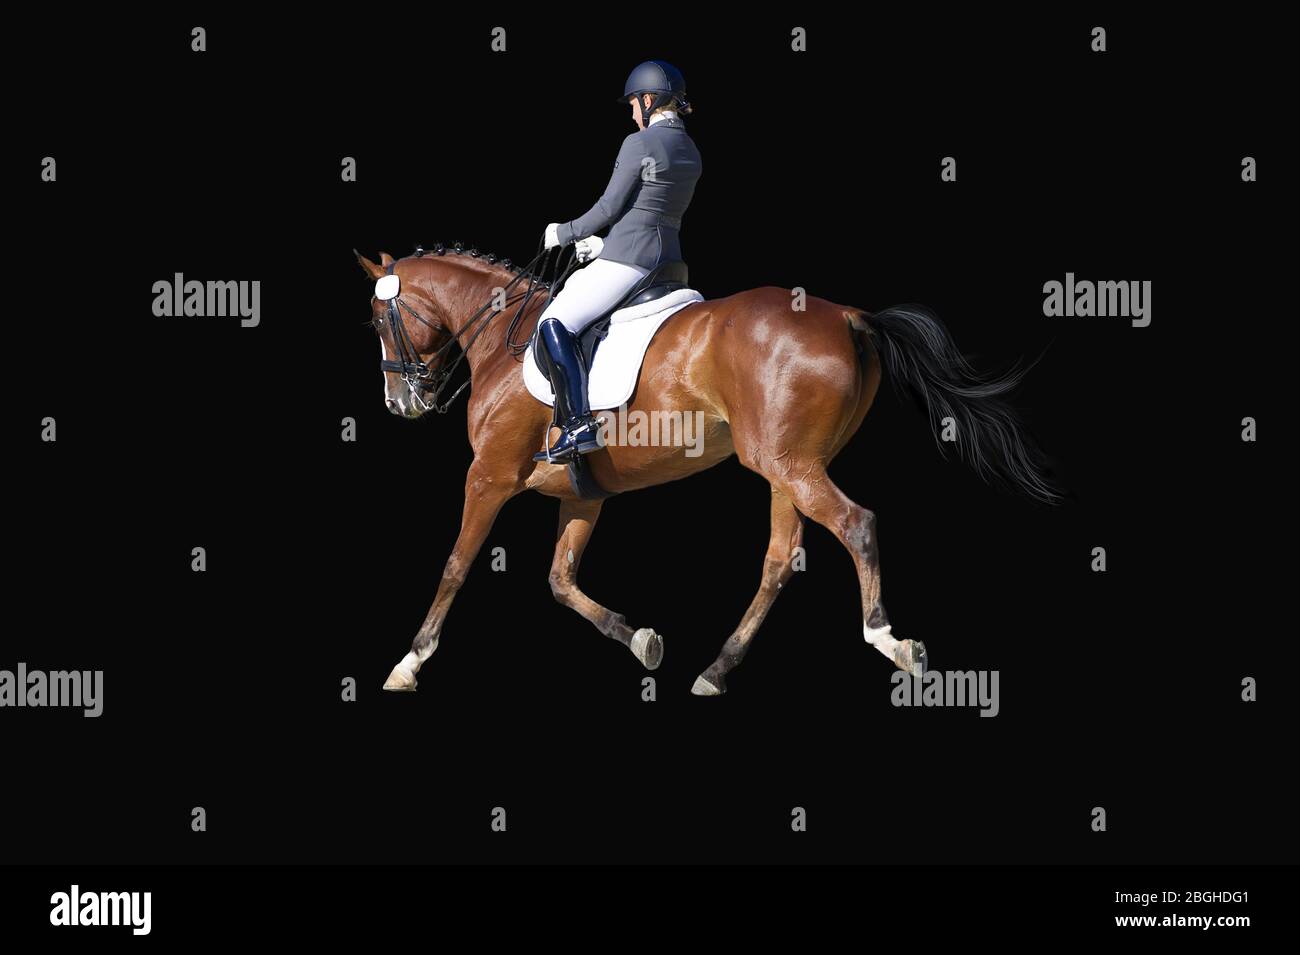 dressage rider portrait on Equestrian sport - dressage isolated on white black in the competition Stock Photo